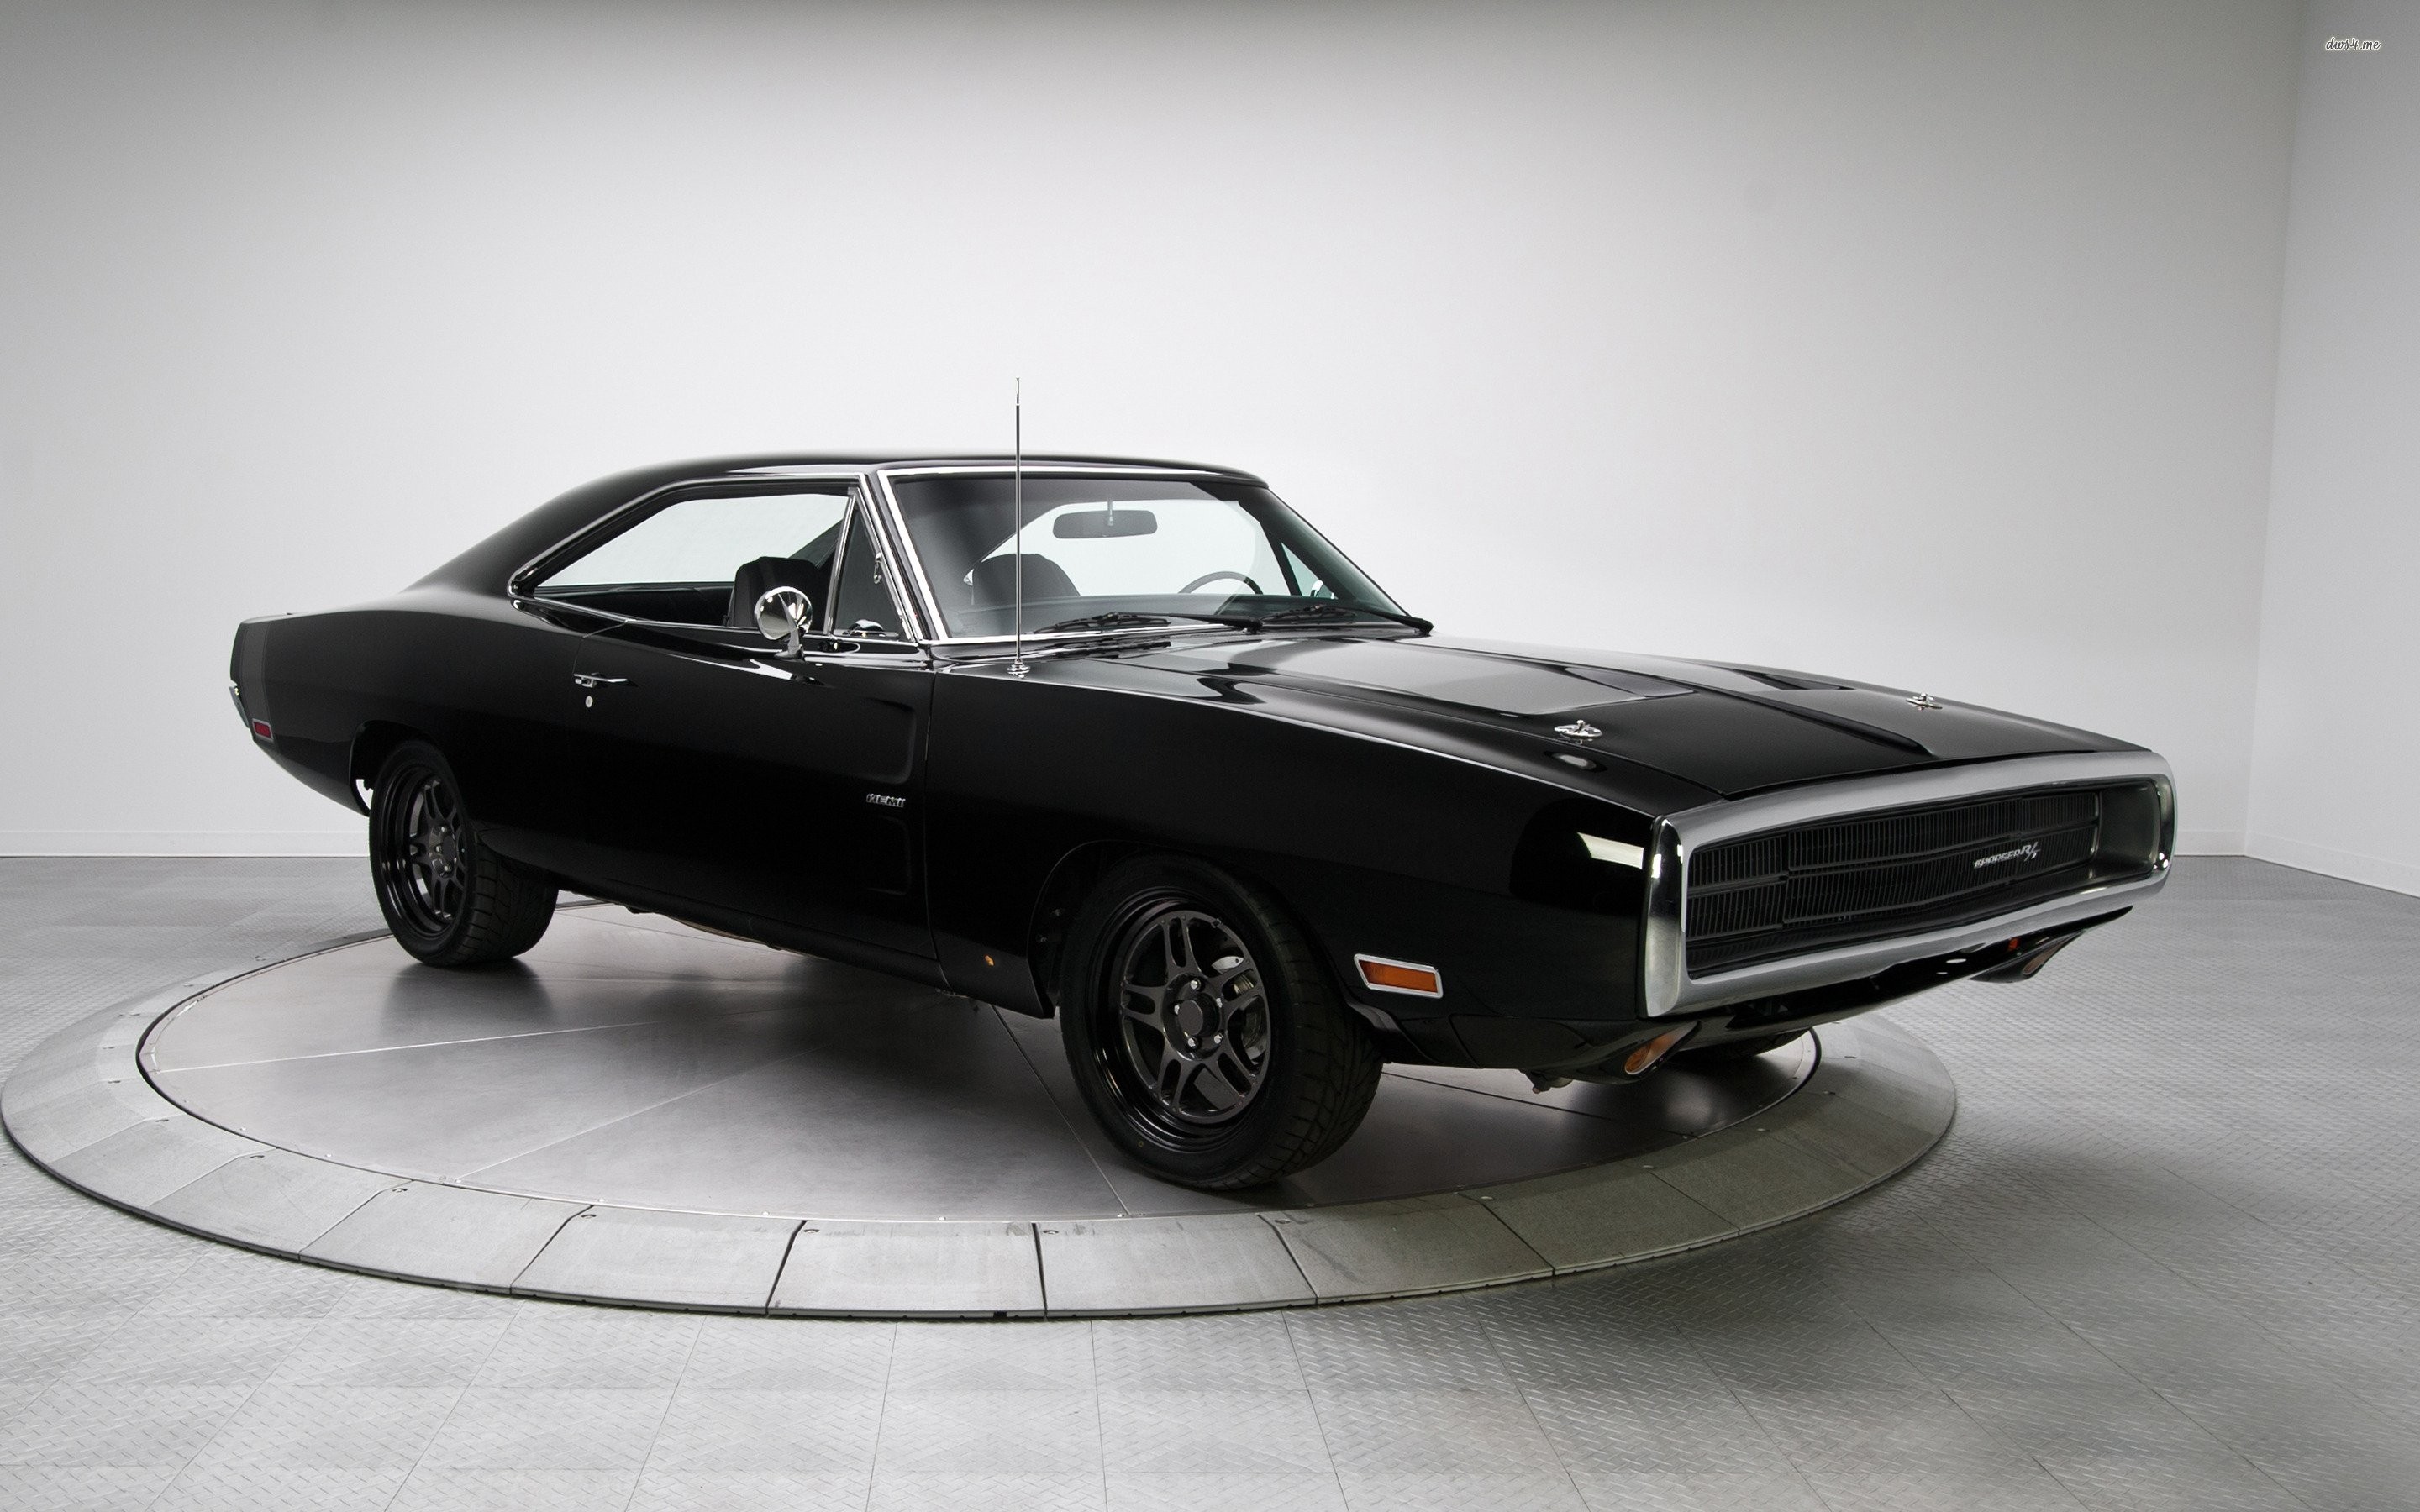 Dodge Charger R T, Charger RT, Black, Dodge, Muscle Cars, American Cars